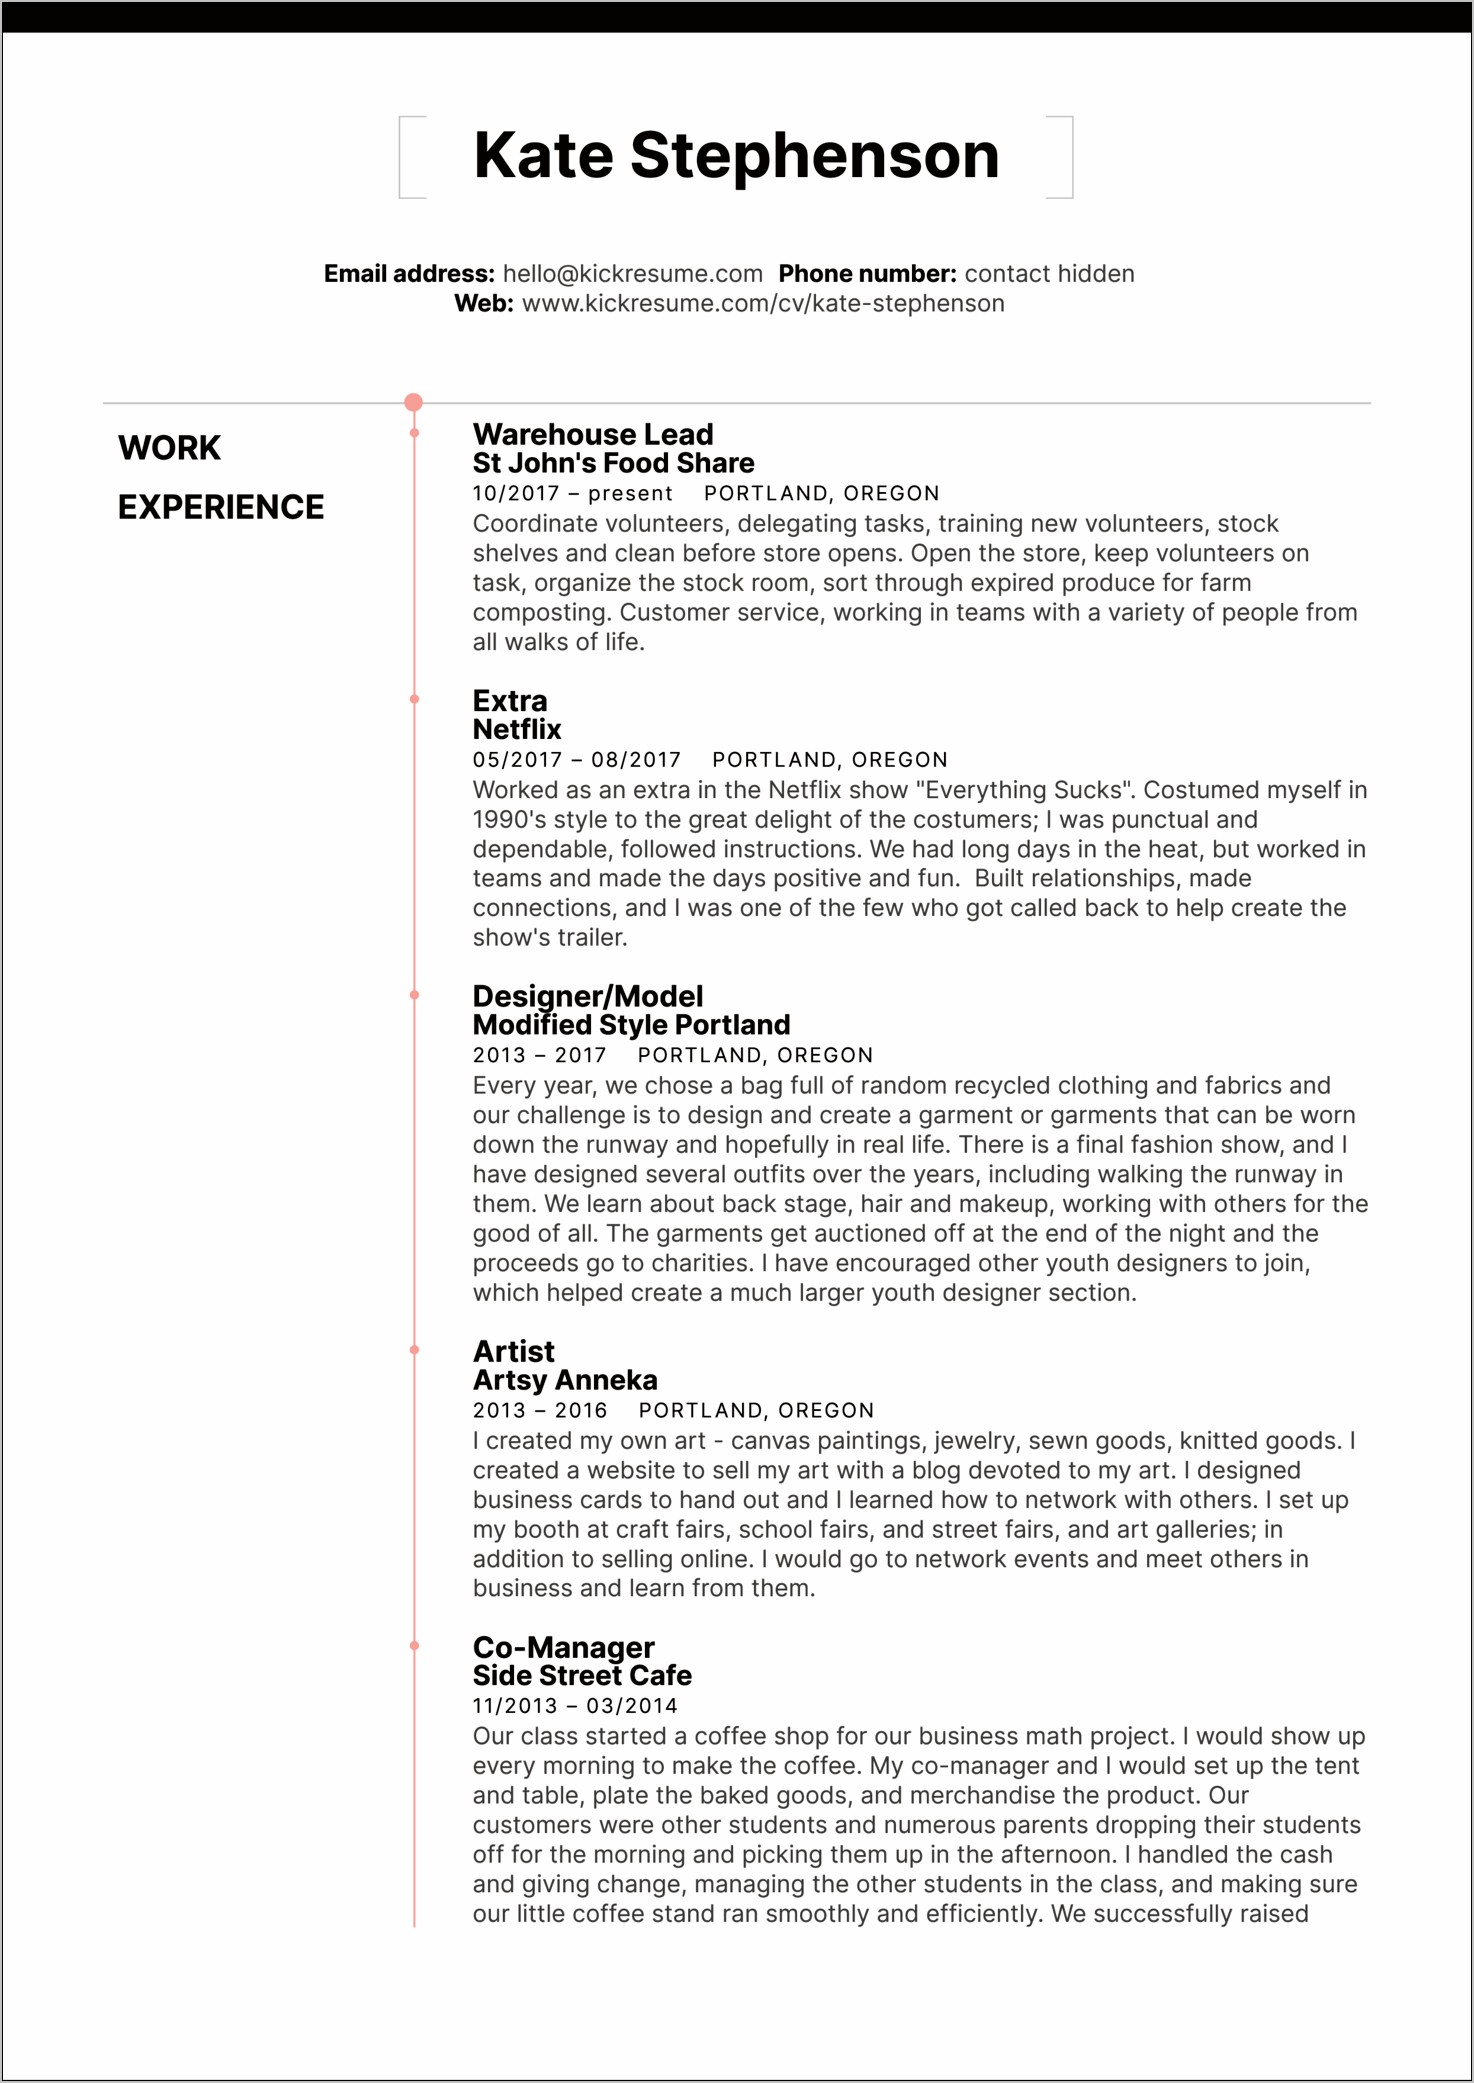 Resume Cover Letter Examples Barista